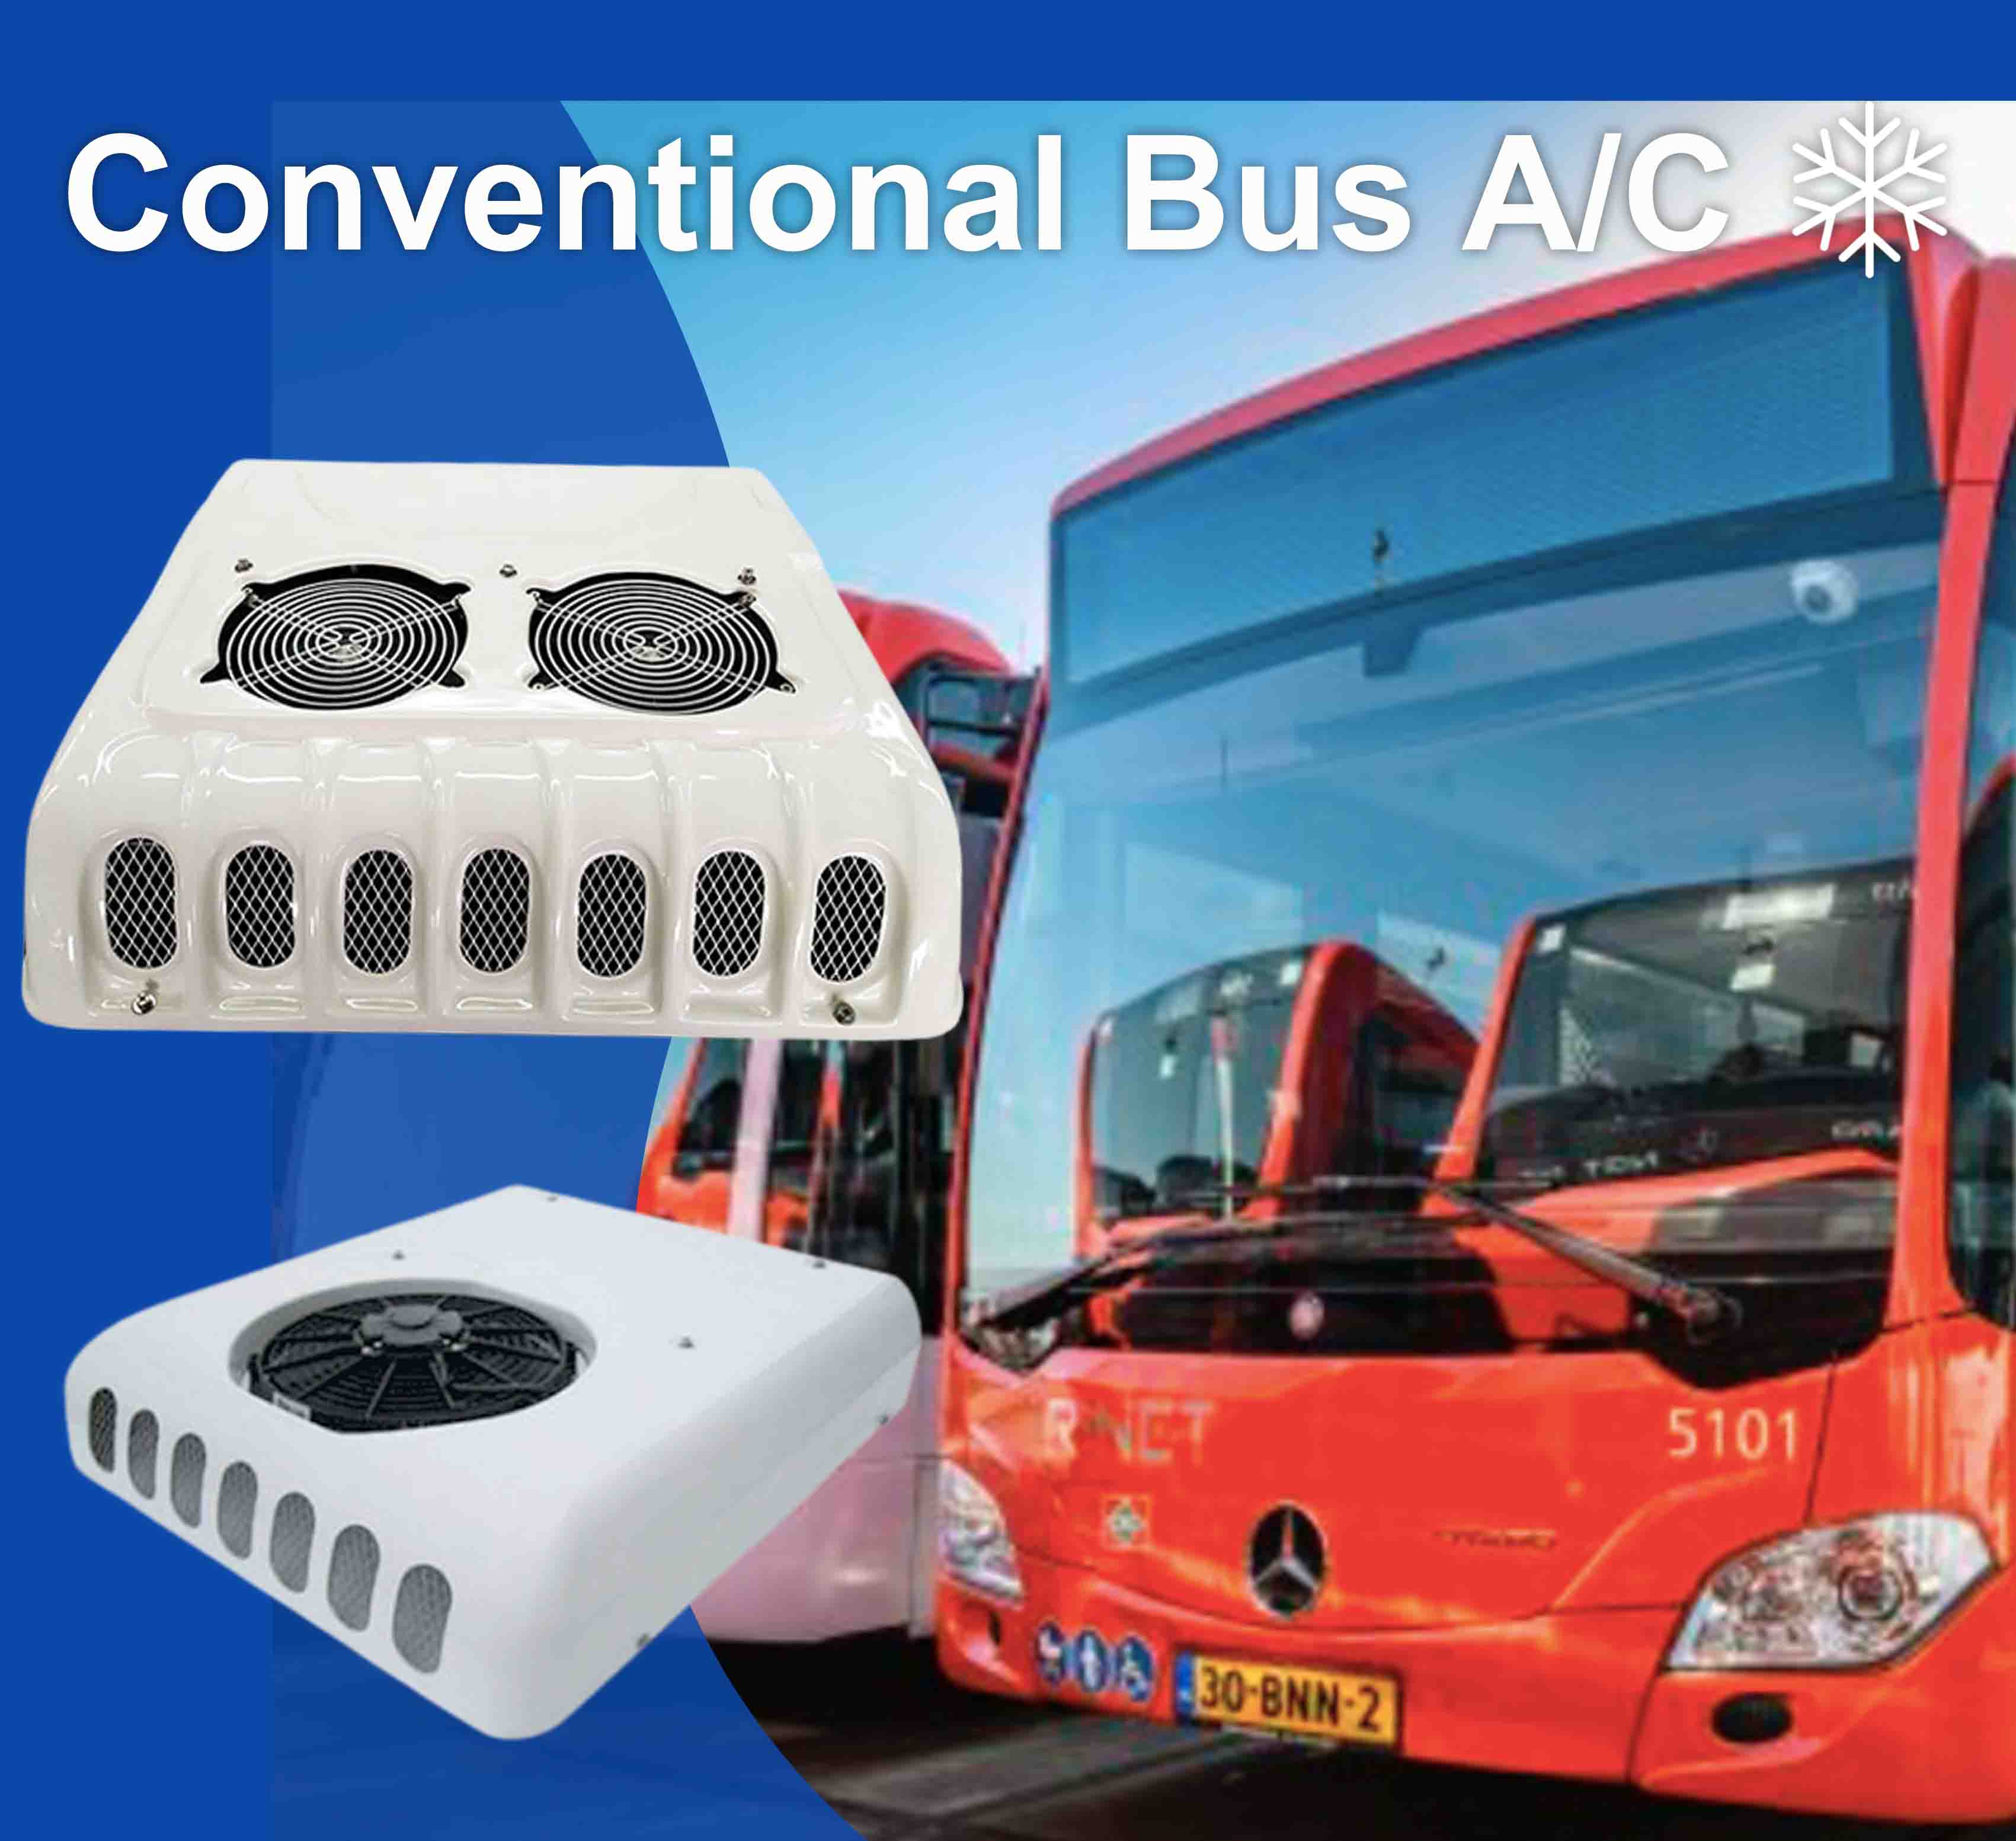 All TKT Con bus air conditioners